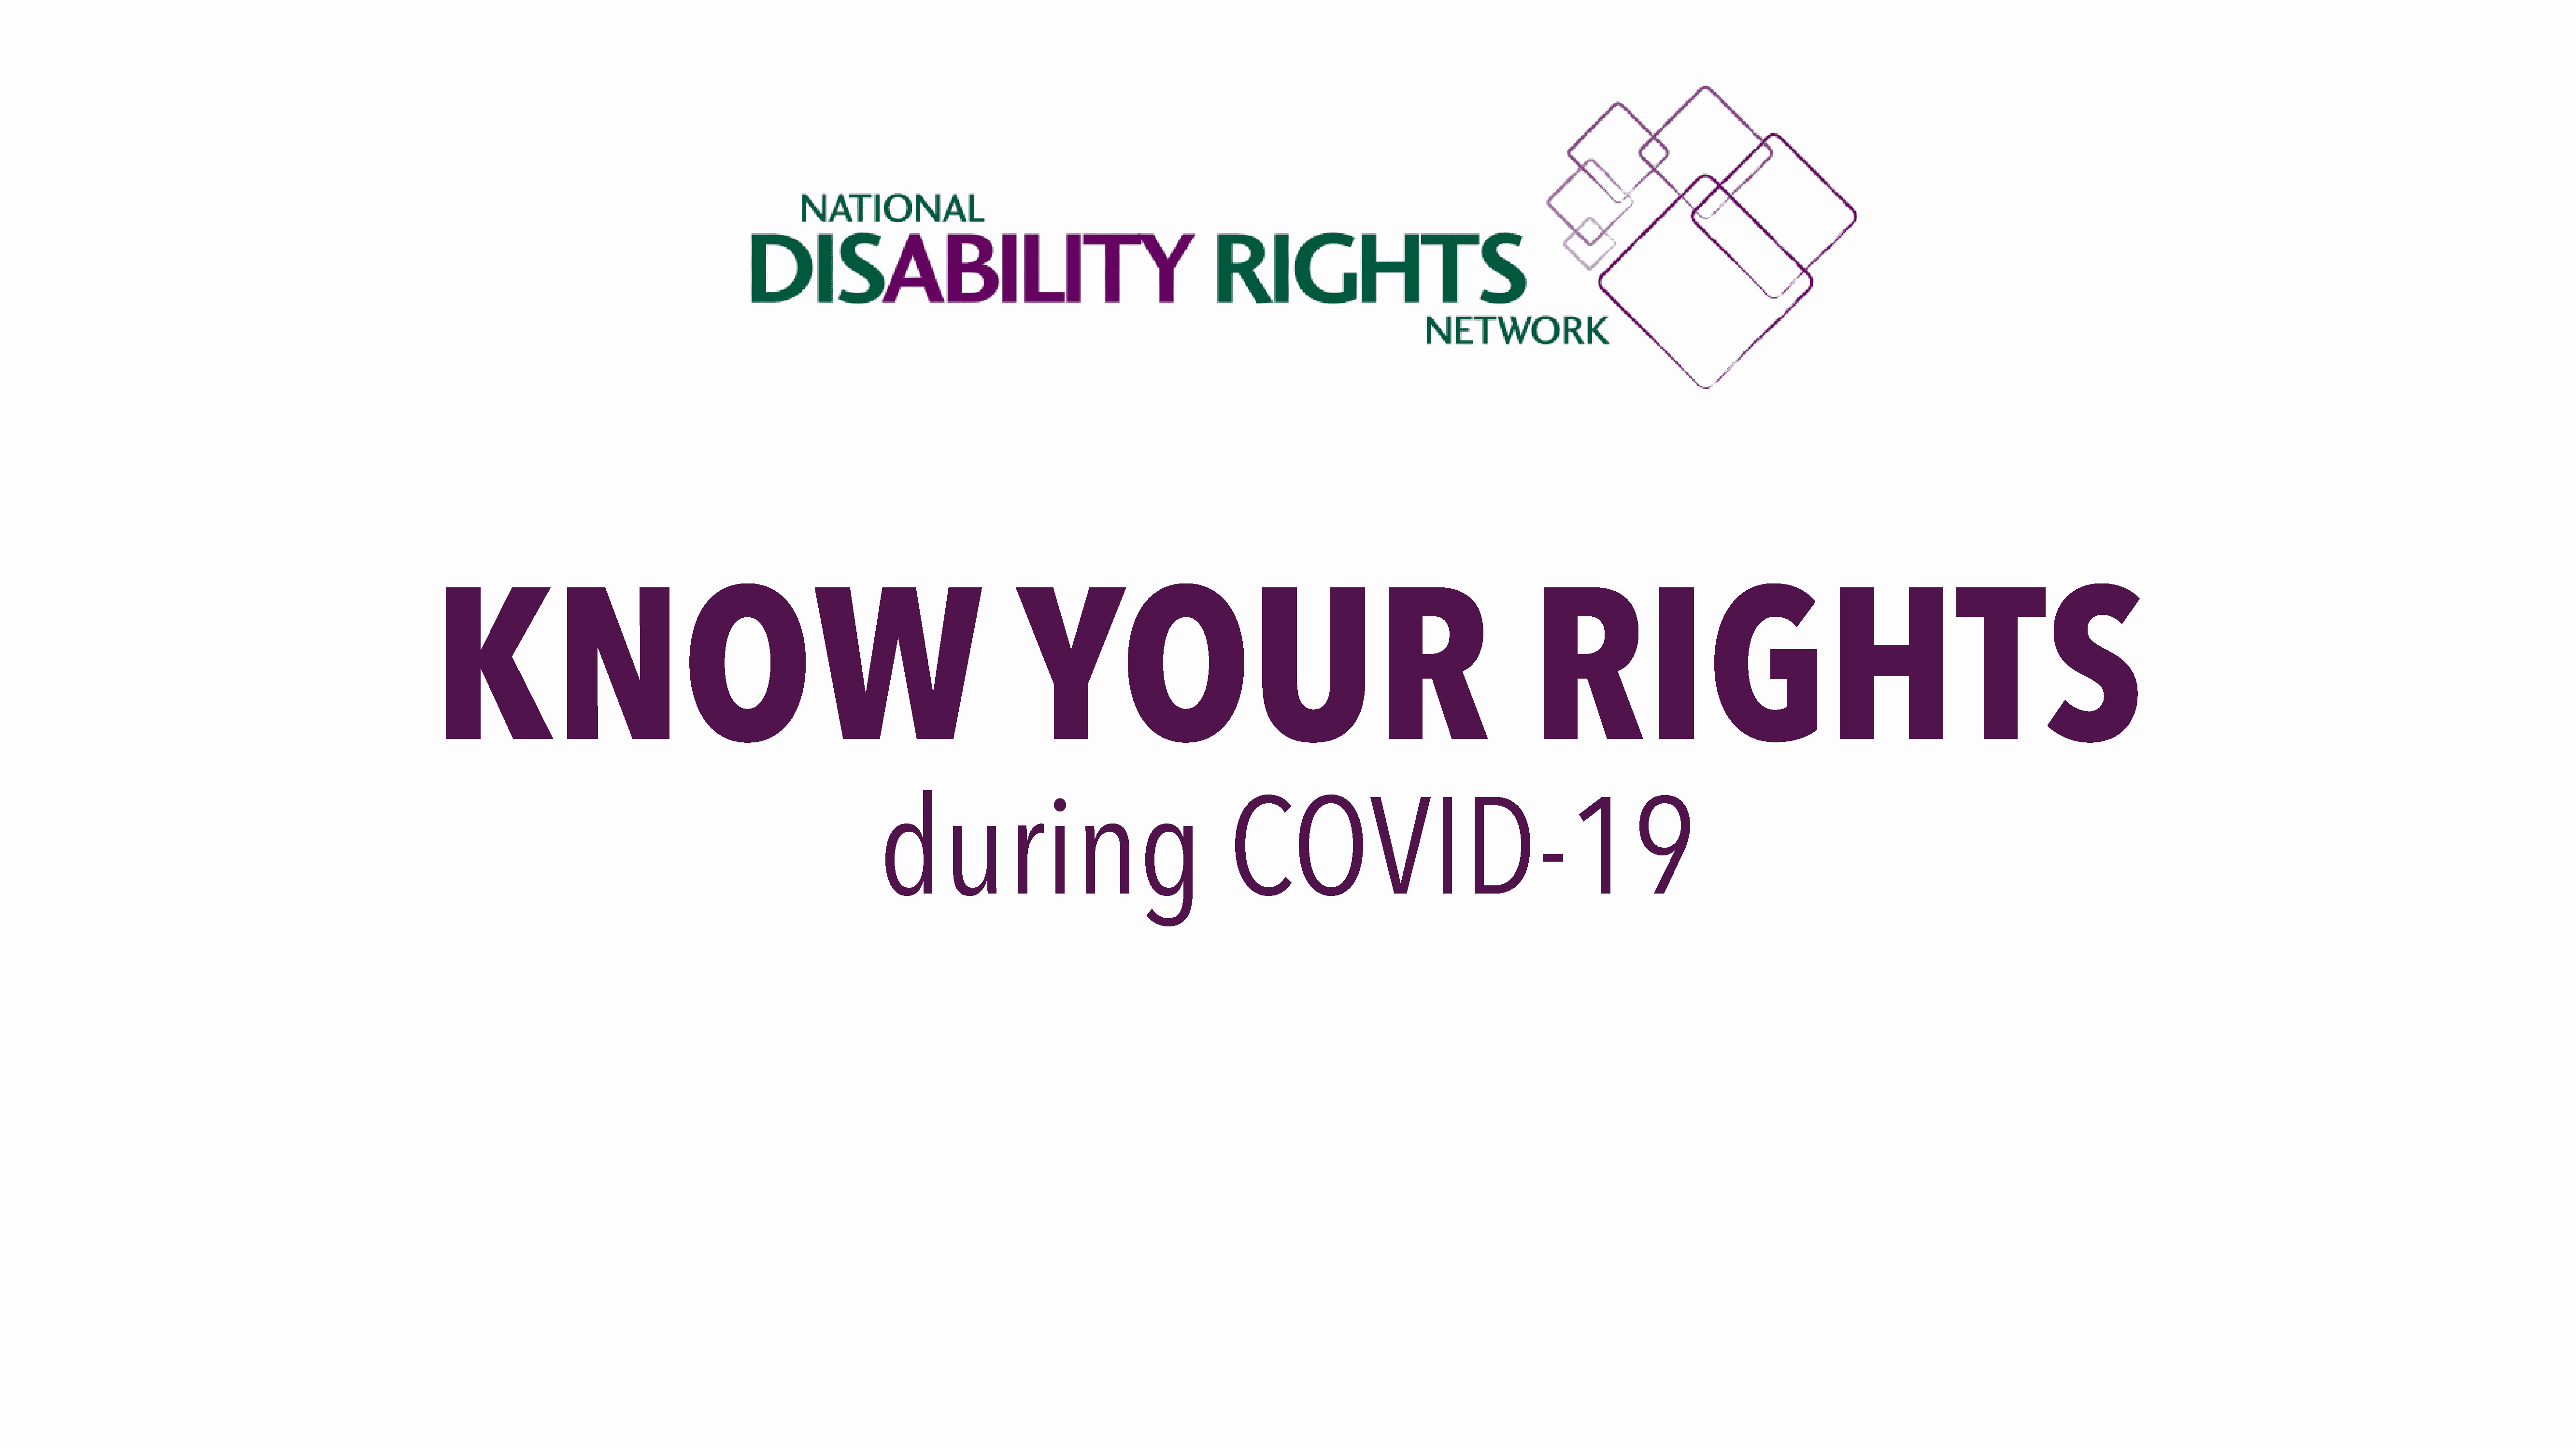 NDRN logo with "Know Your Rights during COVID-19" in large text